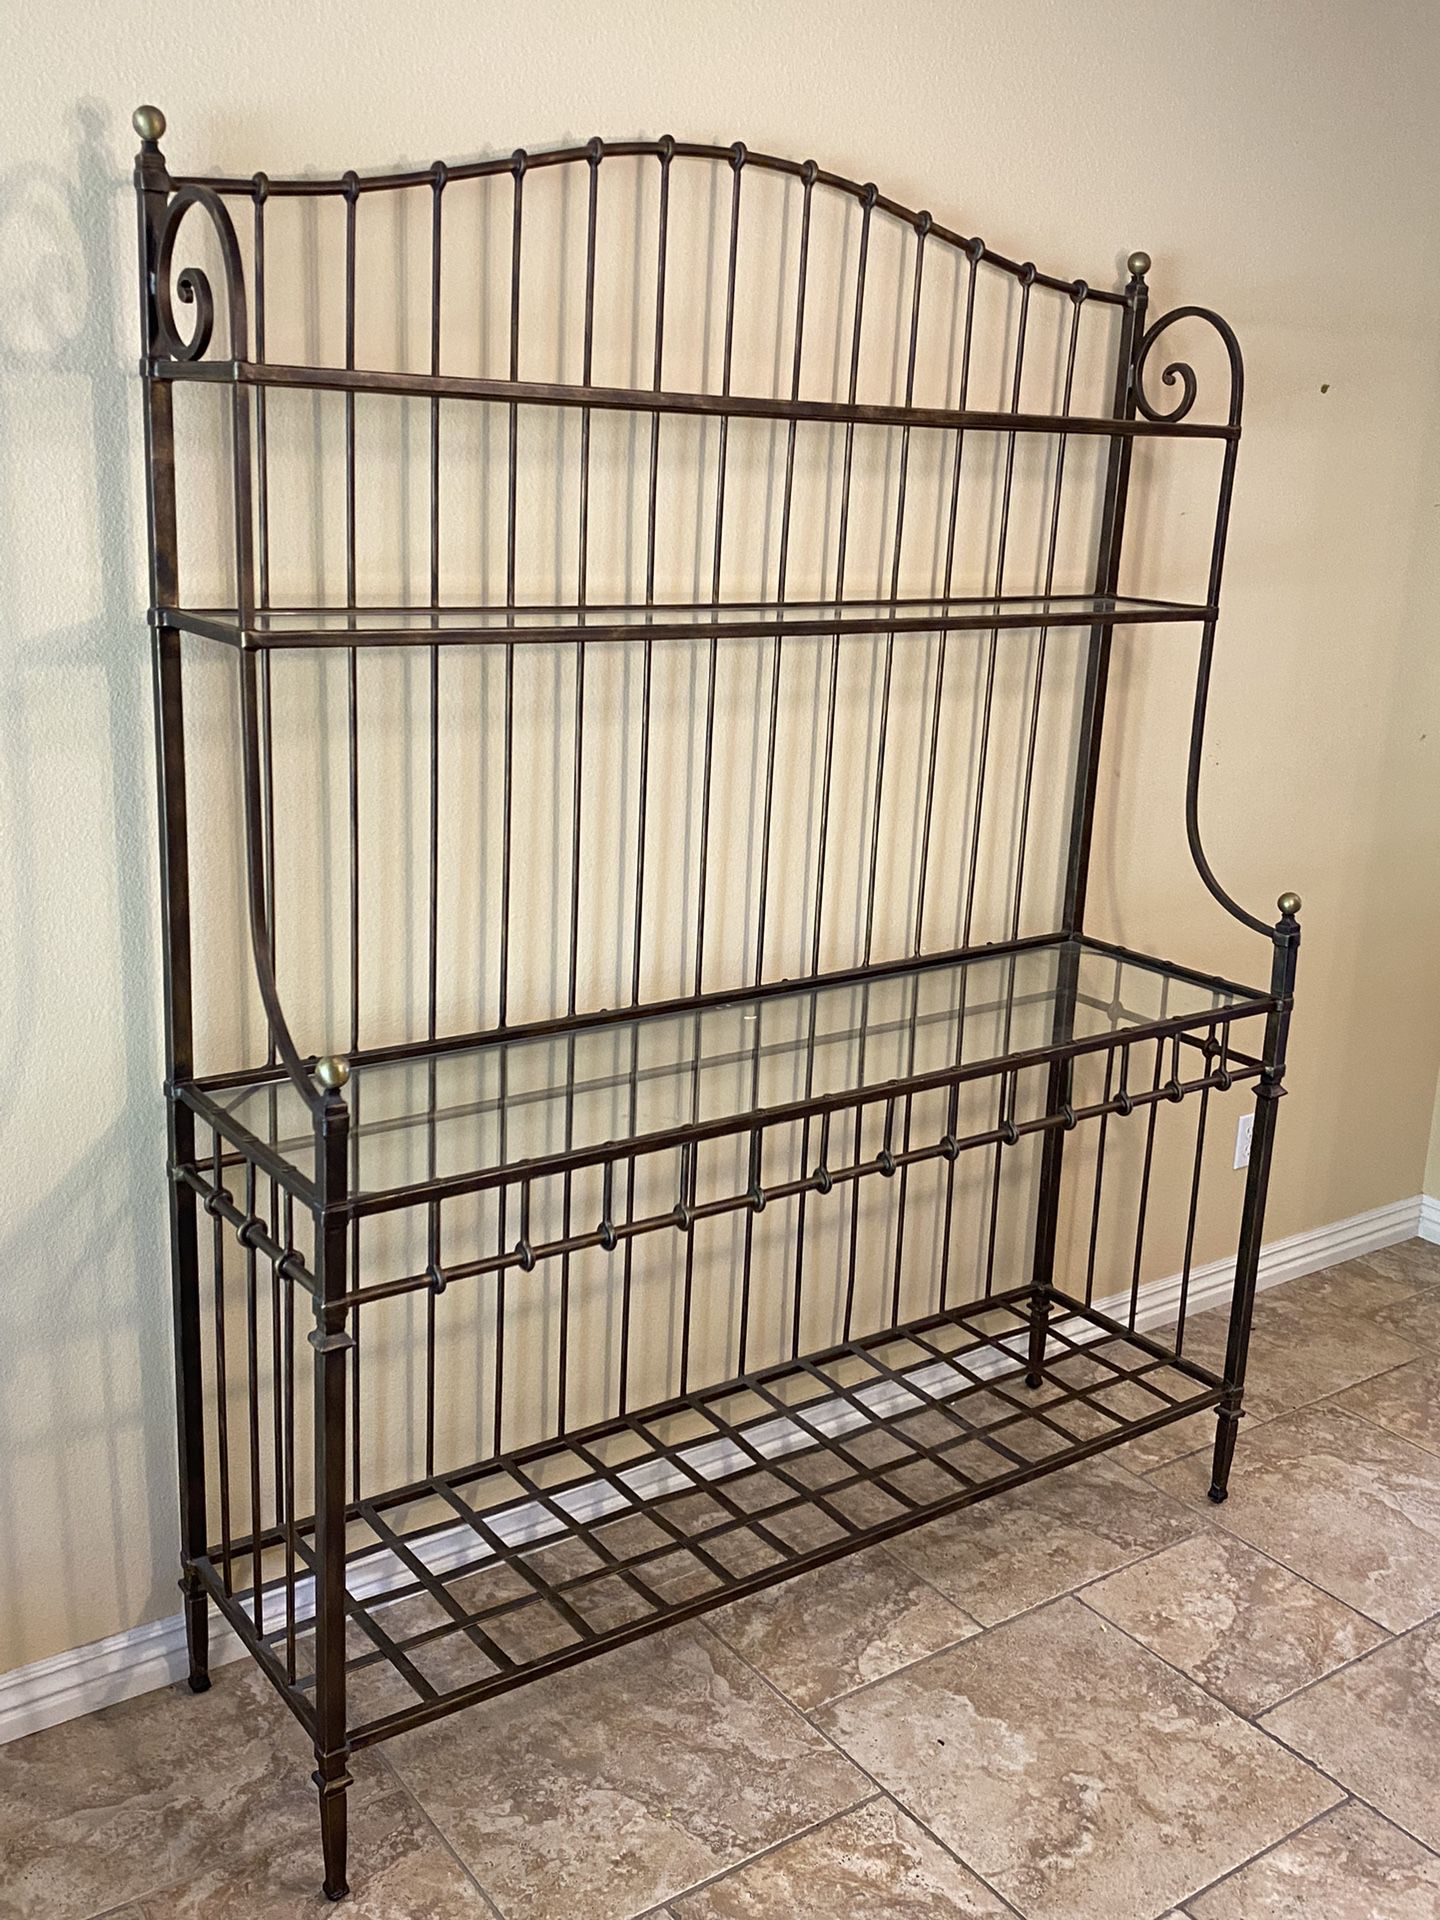 BEAUTIFUL “HARDEN FINE FURNITURE” LARGE SIZE BAKERS RACK W/ 3 X GLASS SHELVES (63”W X 18”D X 82”H)